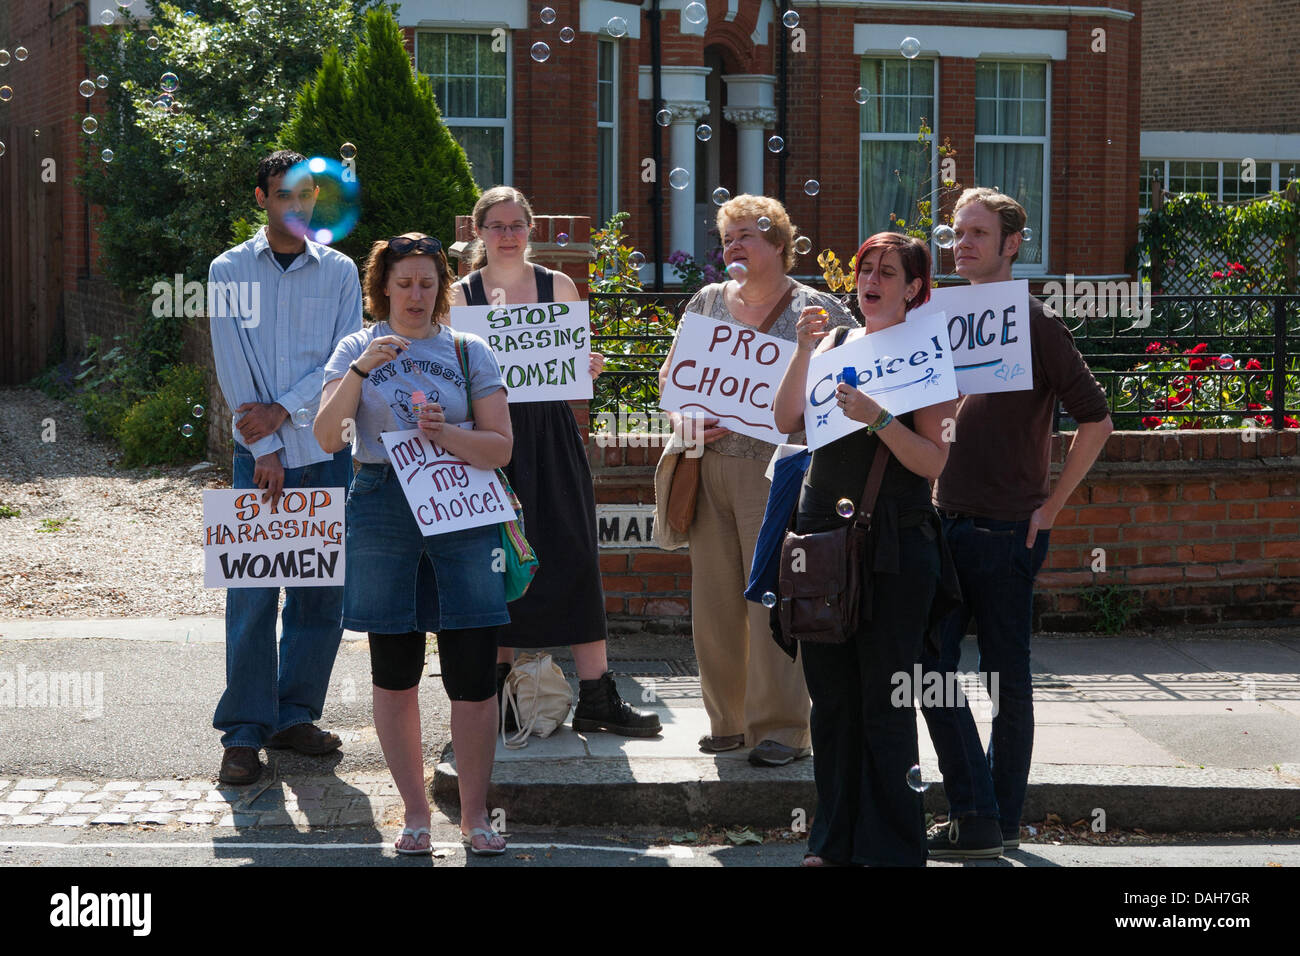 London, UK. 13th July 2013. Pro-choice counter-protesters holding placards to religious anti abortionists at Ealing Abbey, Ealing London, UK. 13th July 2013 Credit:  martyn wheatley/Alamy Live News Stock Photo